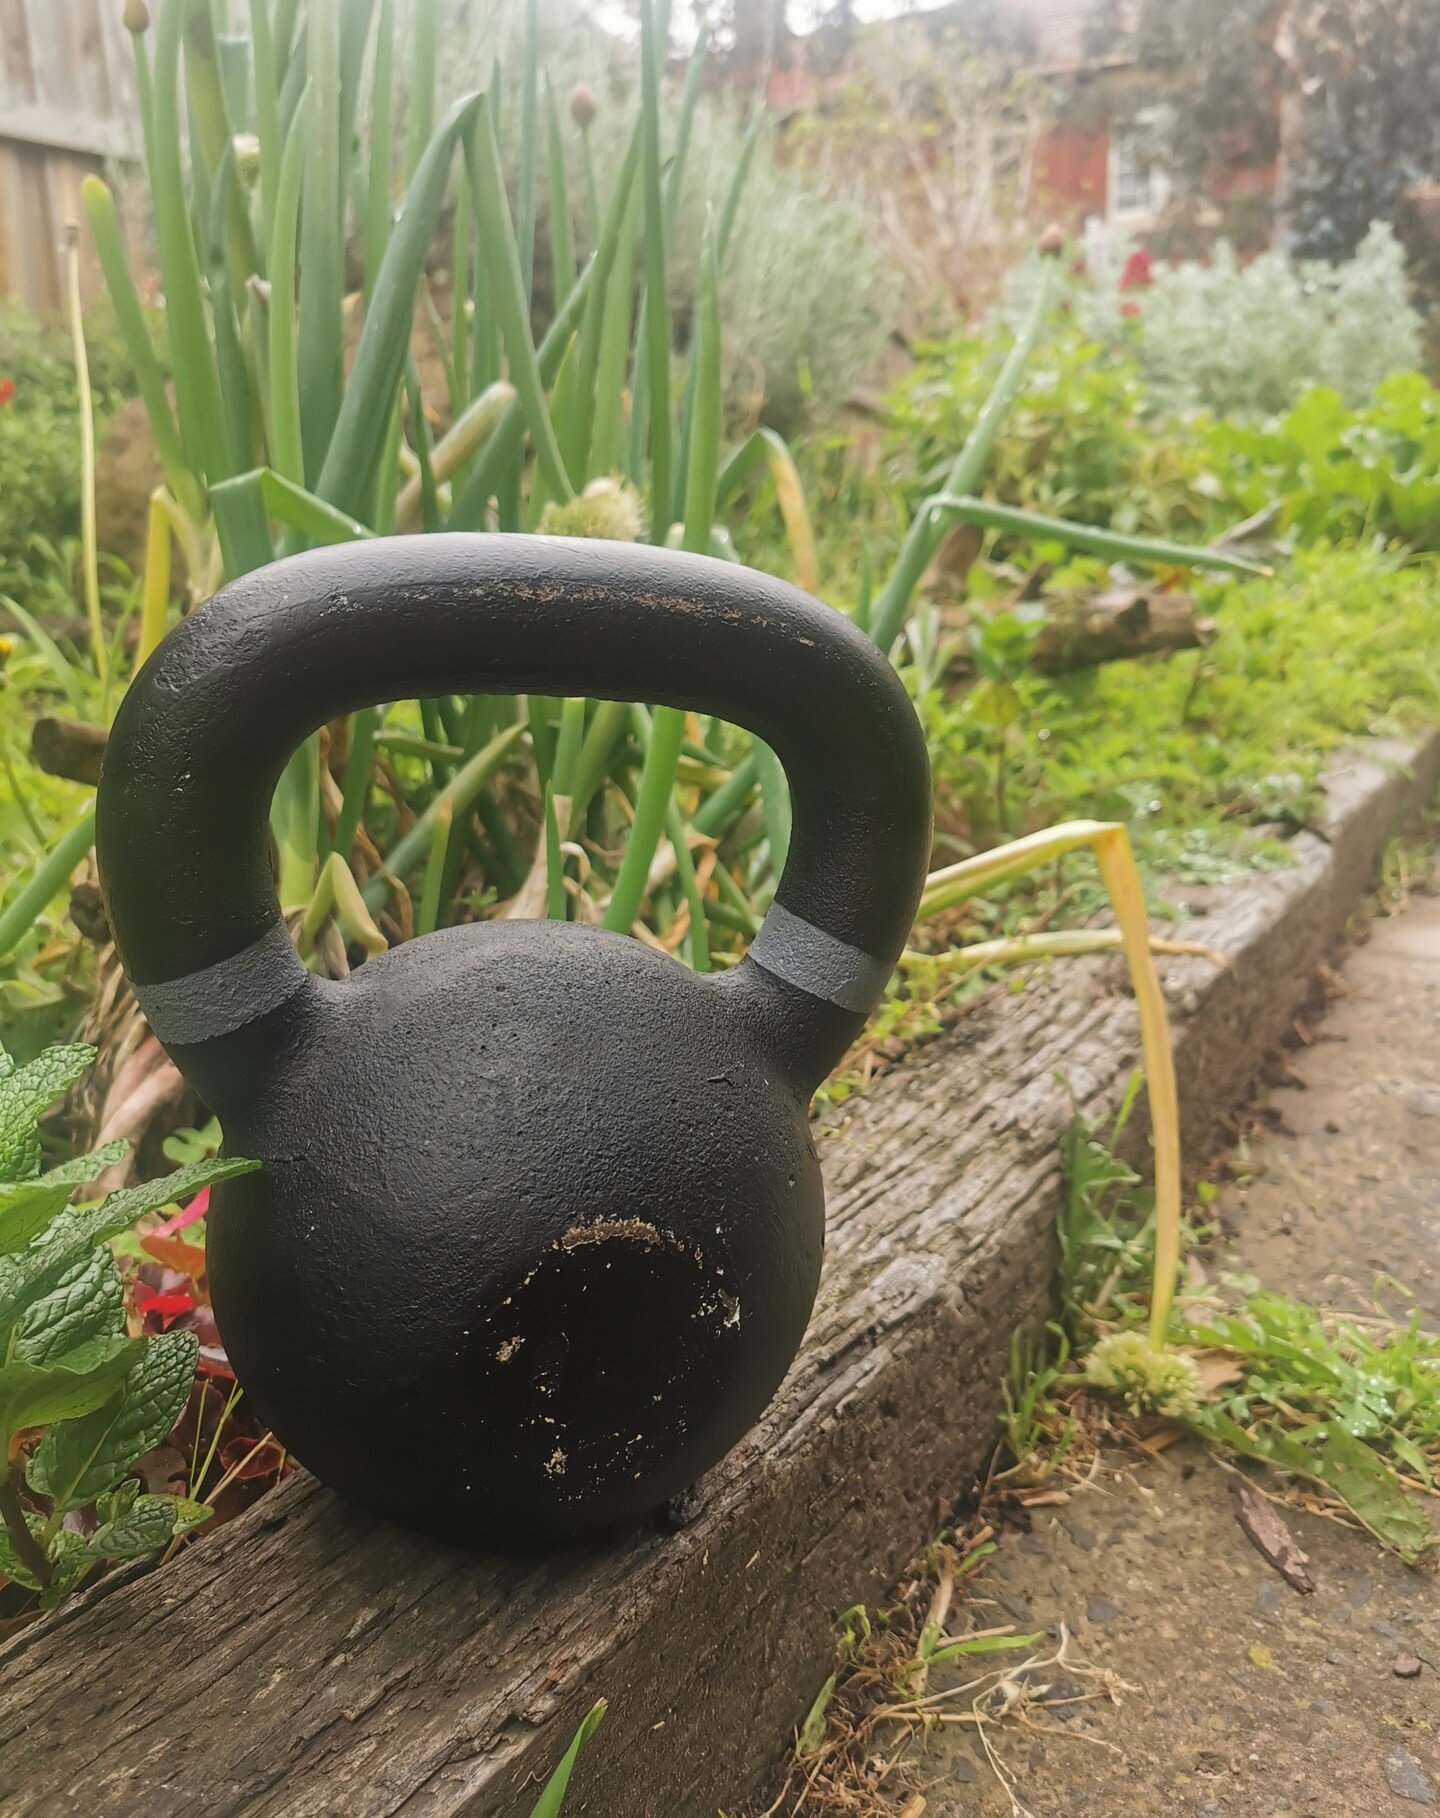 'Using kettlebells helped me to regulate when times got hard.'

-Male participant

#exercise #exerciseroutine #kettlebell #kettlebelltraining #kettlebellworkout #lockdown #lockdownlife #mentalhealth #mentalhealthmatters #movement #movimento #objects 